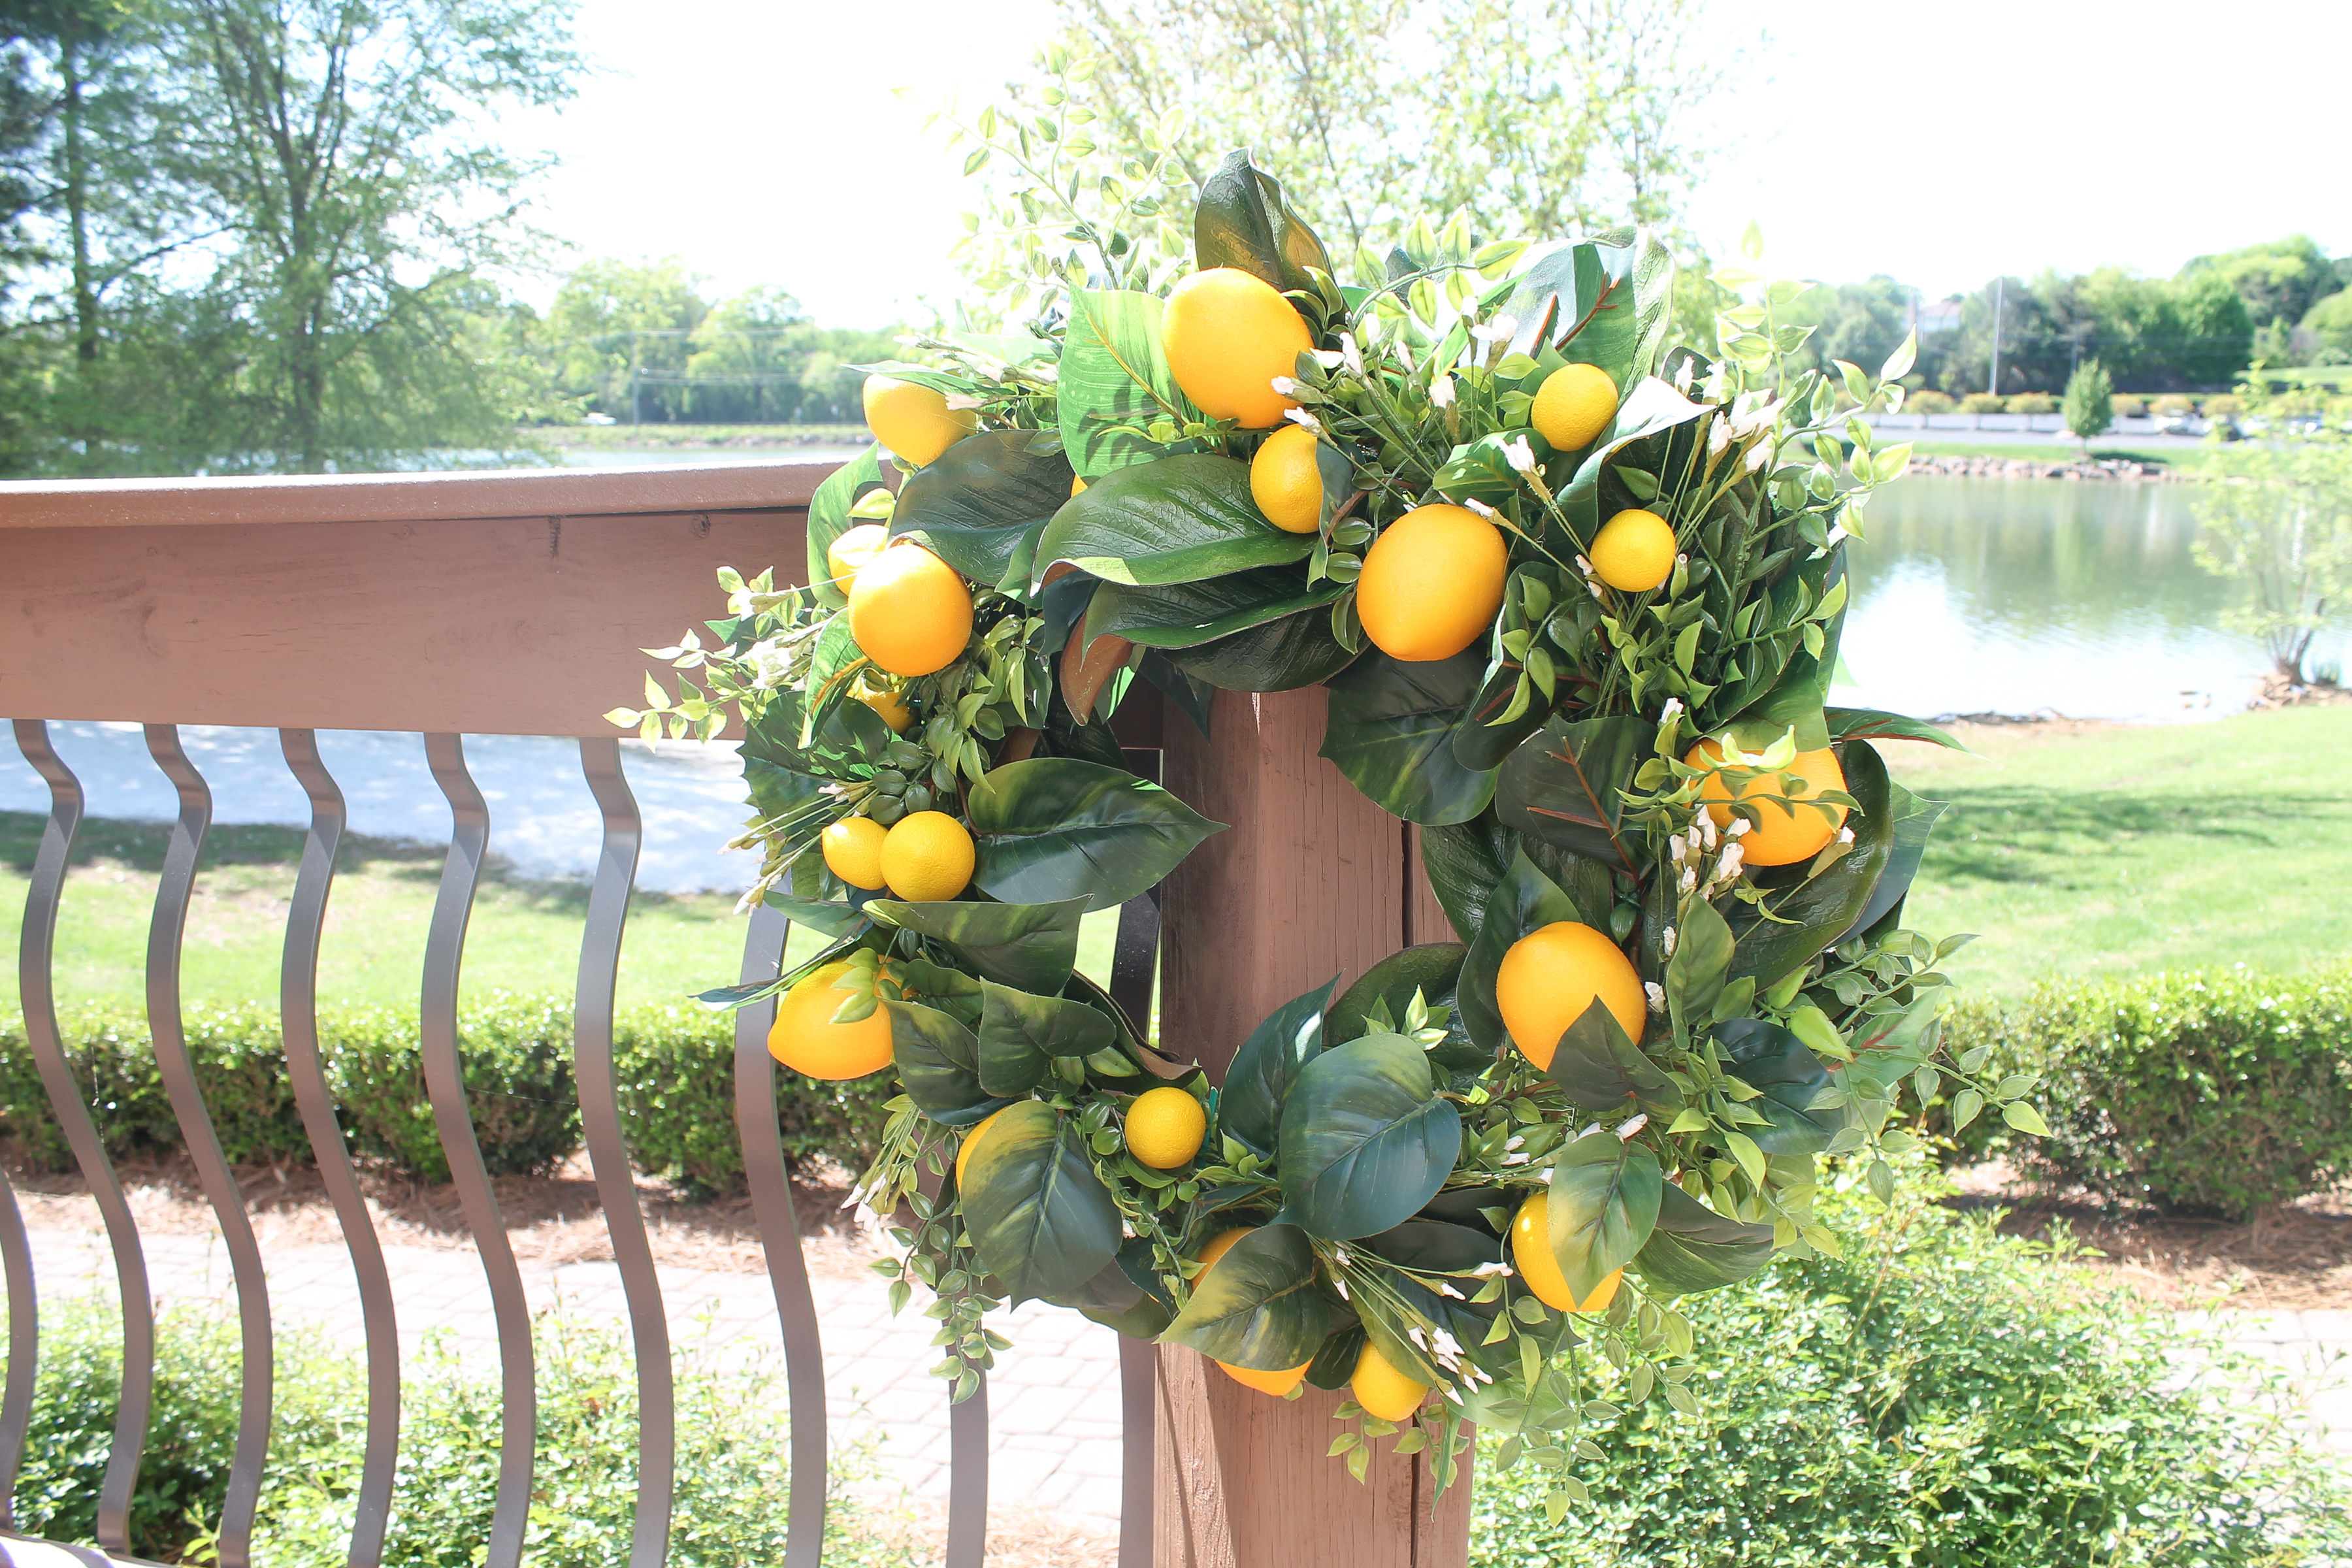 Firlar 15.7 Inch Artificial Lemon Wreath Handmade Lemon Garland with Green Leaves and Bowknot Front Door Wreath Simulation Fruit Wreath Spring Wreath for Wall Window Farmhouse Party Holiday Decor 